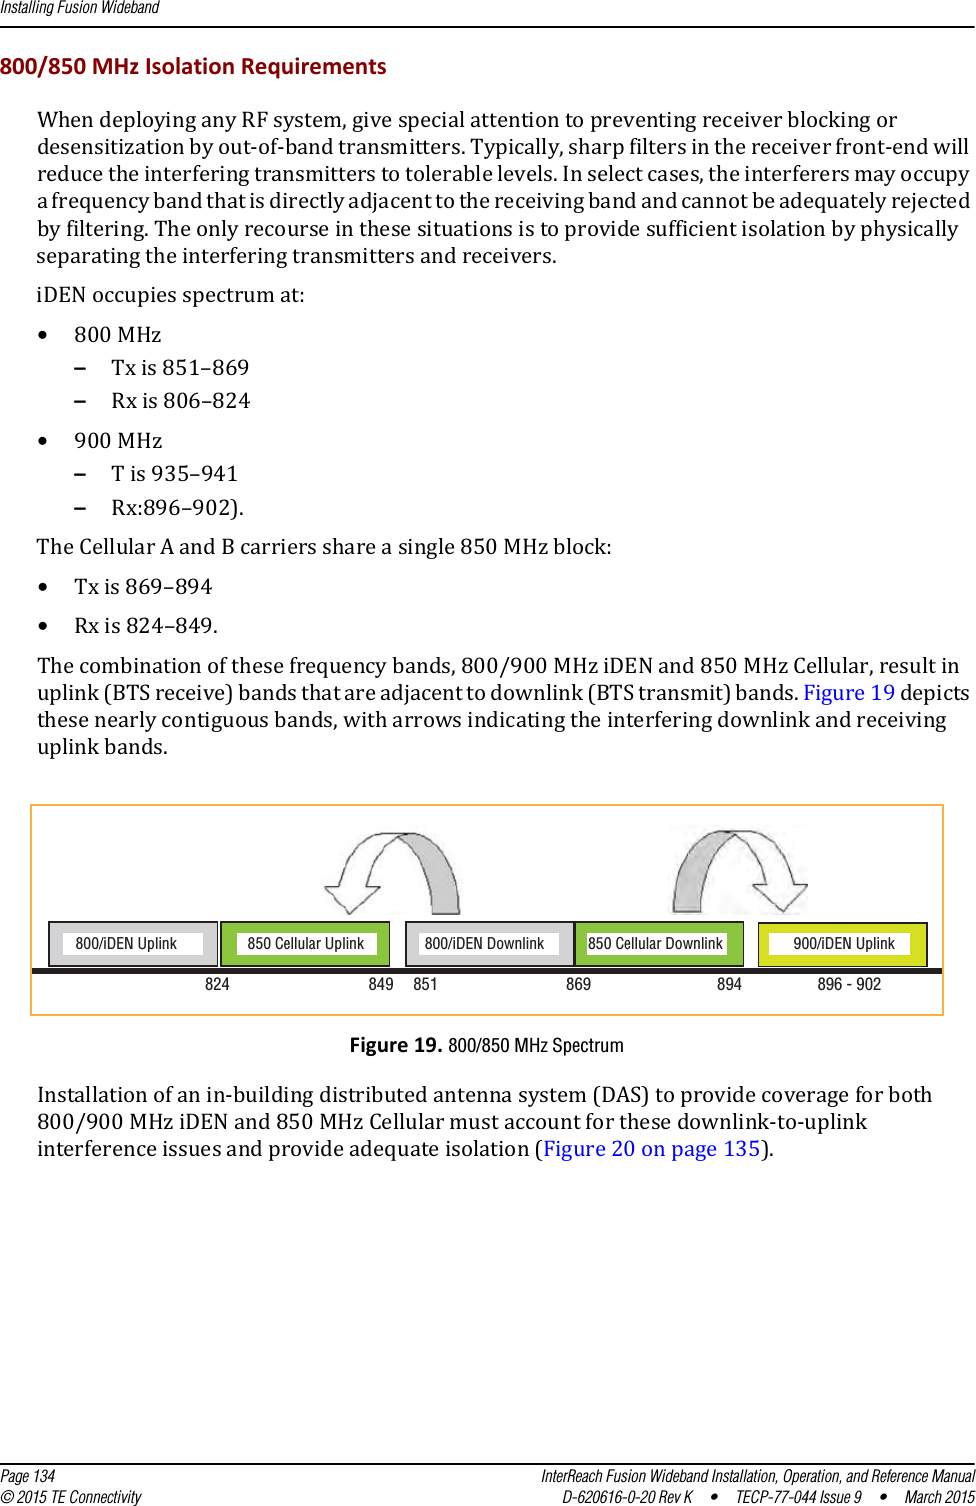 Installing Fusion Wideband  Page 134 InterReach Fusion Wideband Installation, Operation, and Reference Manual© 2015 TE Connectivity D-620616-0-20 Rev K  •  TECP-77-044 Issue 9  •  March 2015800/850 MHz Isolation RequirementsWhen deploying any RF system, give special attention to preventing receiver blocking or desensitization by out-of-band transmitters. Typically, sharp filters in the receiver front-end will reduce the interfering transmitters to tolerable levels. In select cases, the interferers may occupy a frequency band that is directly adjacent to the receiving band and cannot be adequately rejected by filtering. The only recourse in these situations is to provide sufficient isolation by physically separating the interfering transmitters and receivers.iDEN occupies spectrum at:•800 MHz –Tx is 851–869–Rx is 806–824 •900 MHz–T is 935–941–Rx:896–902).The Cellular A and B carriers share a single 850 MHz block:•Tx is 869–894•Rx is 824–849. The combination of these frequency bands, 800/900 MHz iDEN and 850 MHz Cellular, result in uplink (BTS receive) bands that are adjacent to downlink (BTS transmit) bands. Figure 19 depicts these nearly contiguous bands, with arrows indicating the interfering downlink and receiving uplink bands.Figure 19. 800/850 MHz SpectrumInstallation of an in-building distributed antenna system (DAS) to provide coverage for both 800/900 MHz iDEN and 850 MHz Cellular must account for these downlink-to-uplink interference issues and provide adequate isolation (Figure 20 on page 135). 824 849 851 869 894 896 - 902800/iDEN Uplink 850 Cellular Uplink 800/iDEN Downlink 850 Cellular Downlink 900/iDEN Uplink